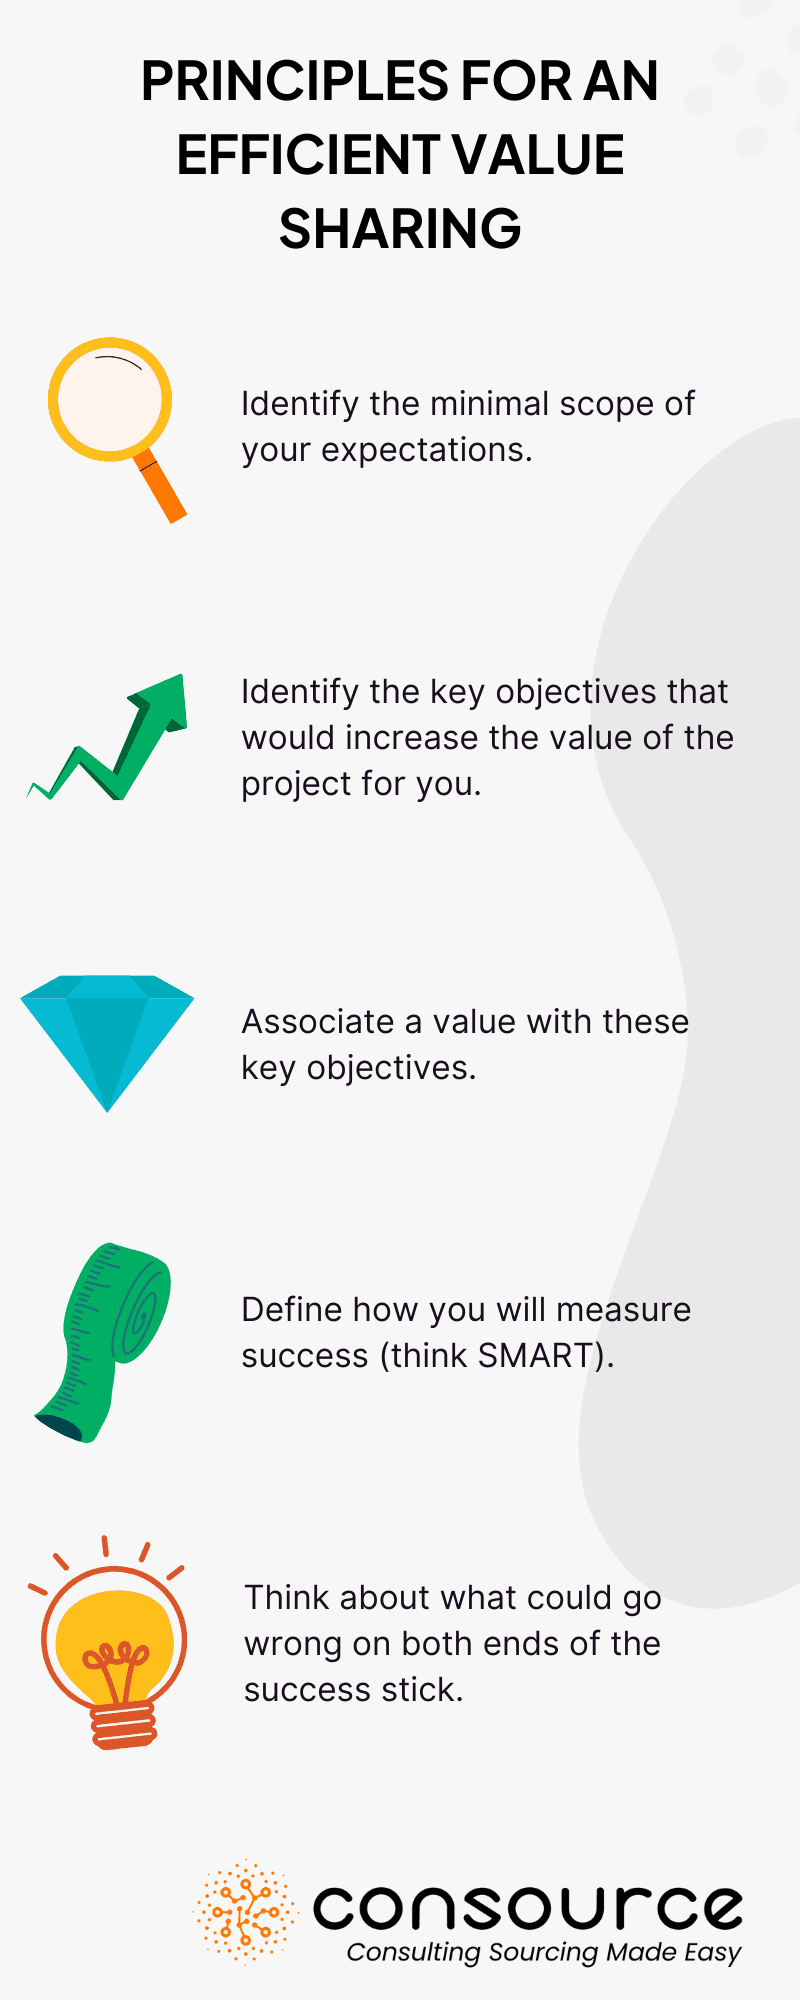 Principles for an efficient value sharing